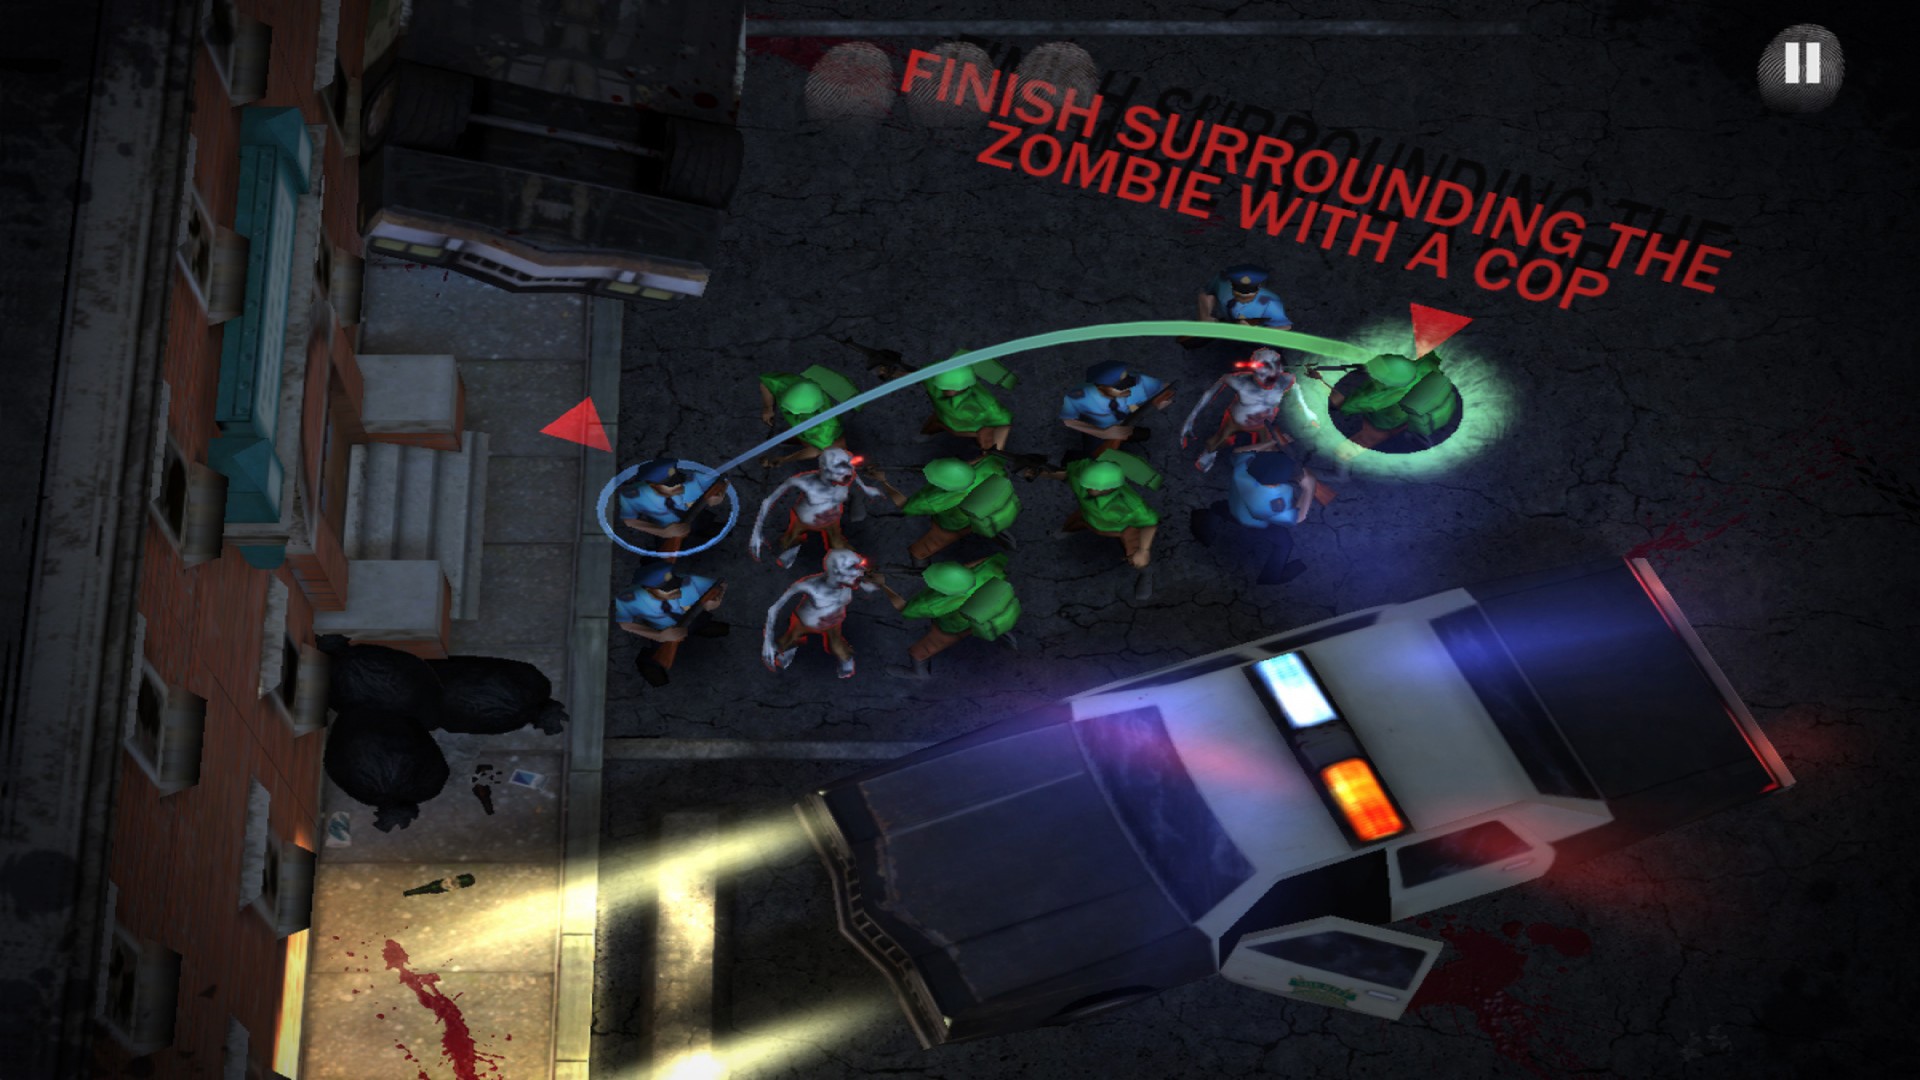 Containment: The Zombie Puzzler Featured Screenshot #1